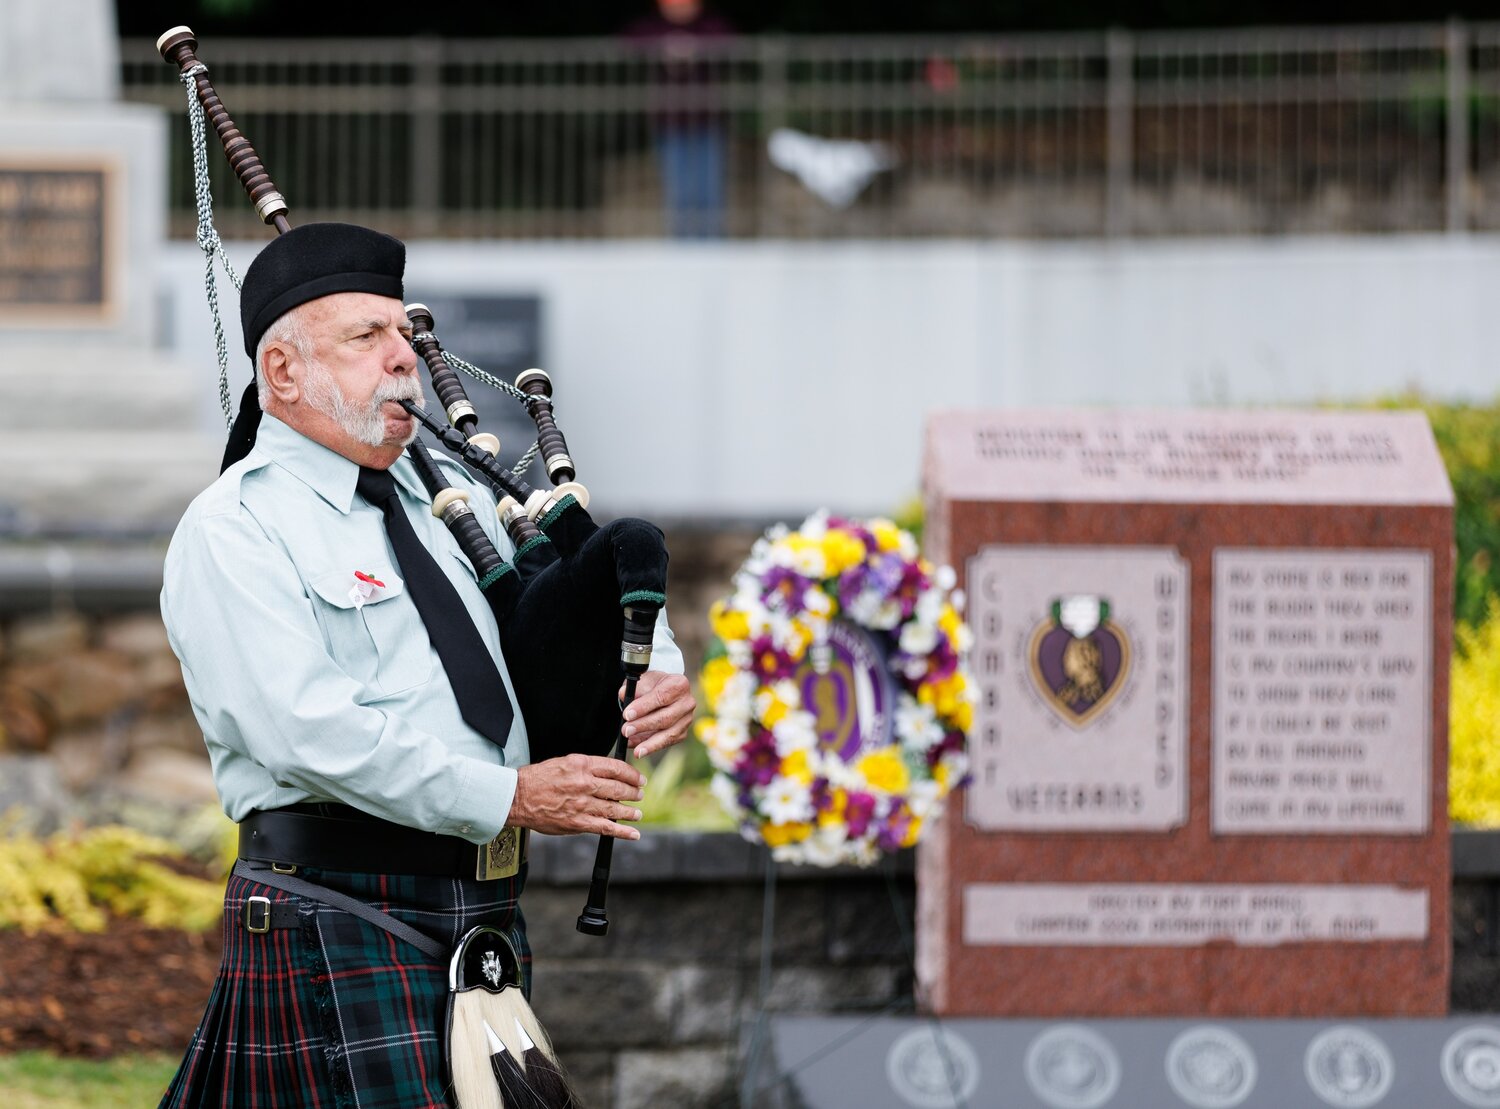 A bagpipe musician plays during the Memorial Day ceremony at Freedom Memorial Park.